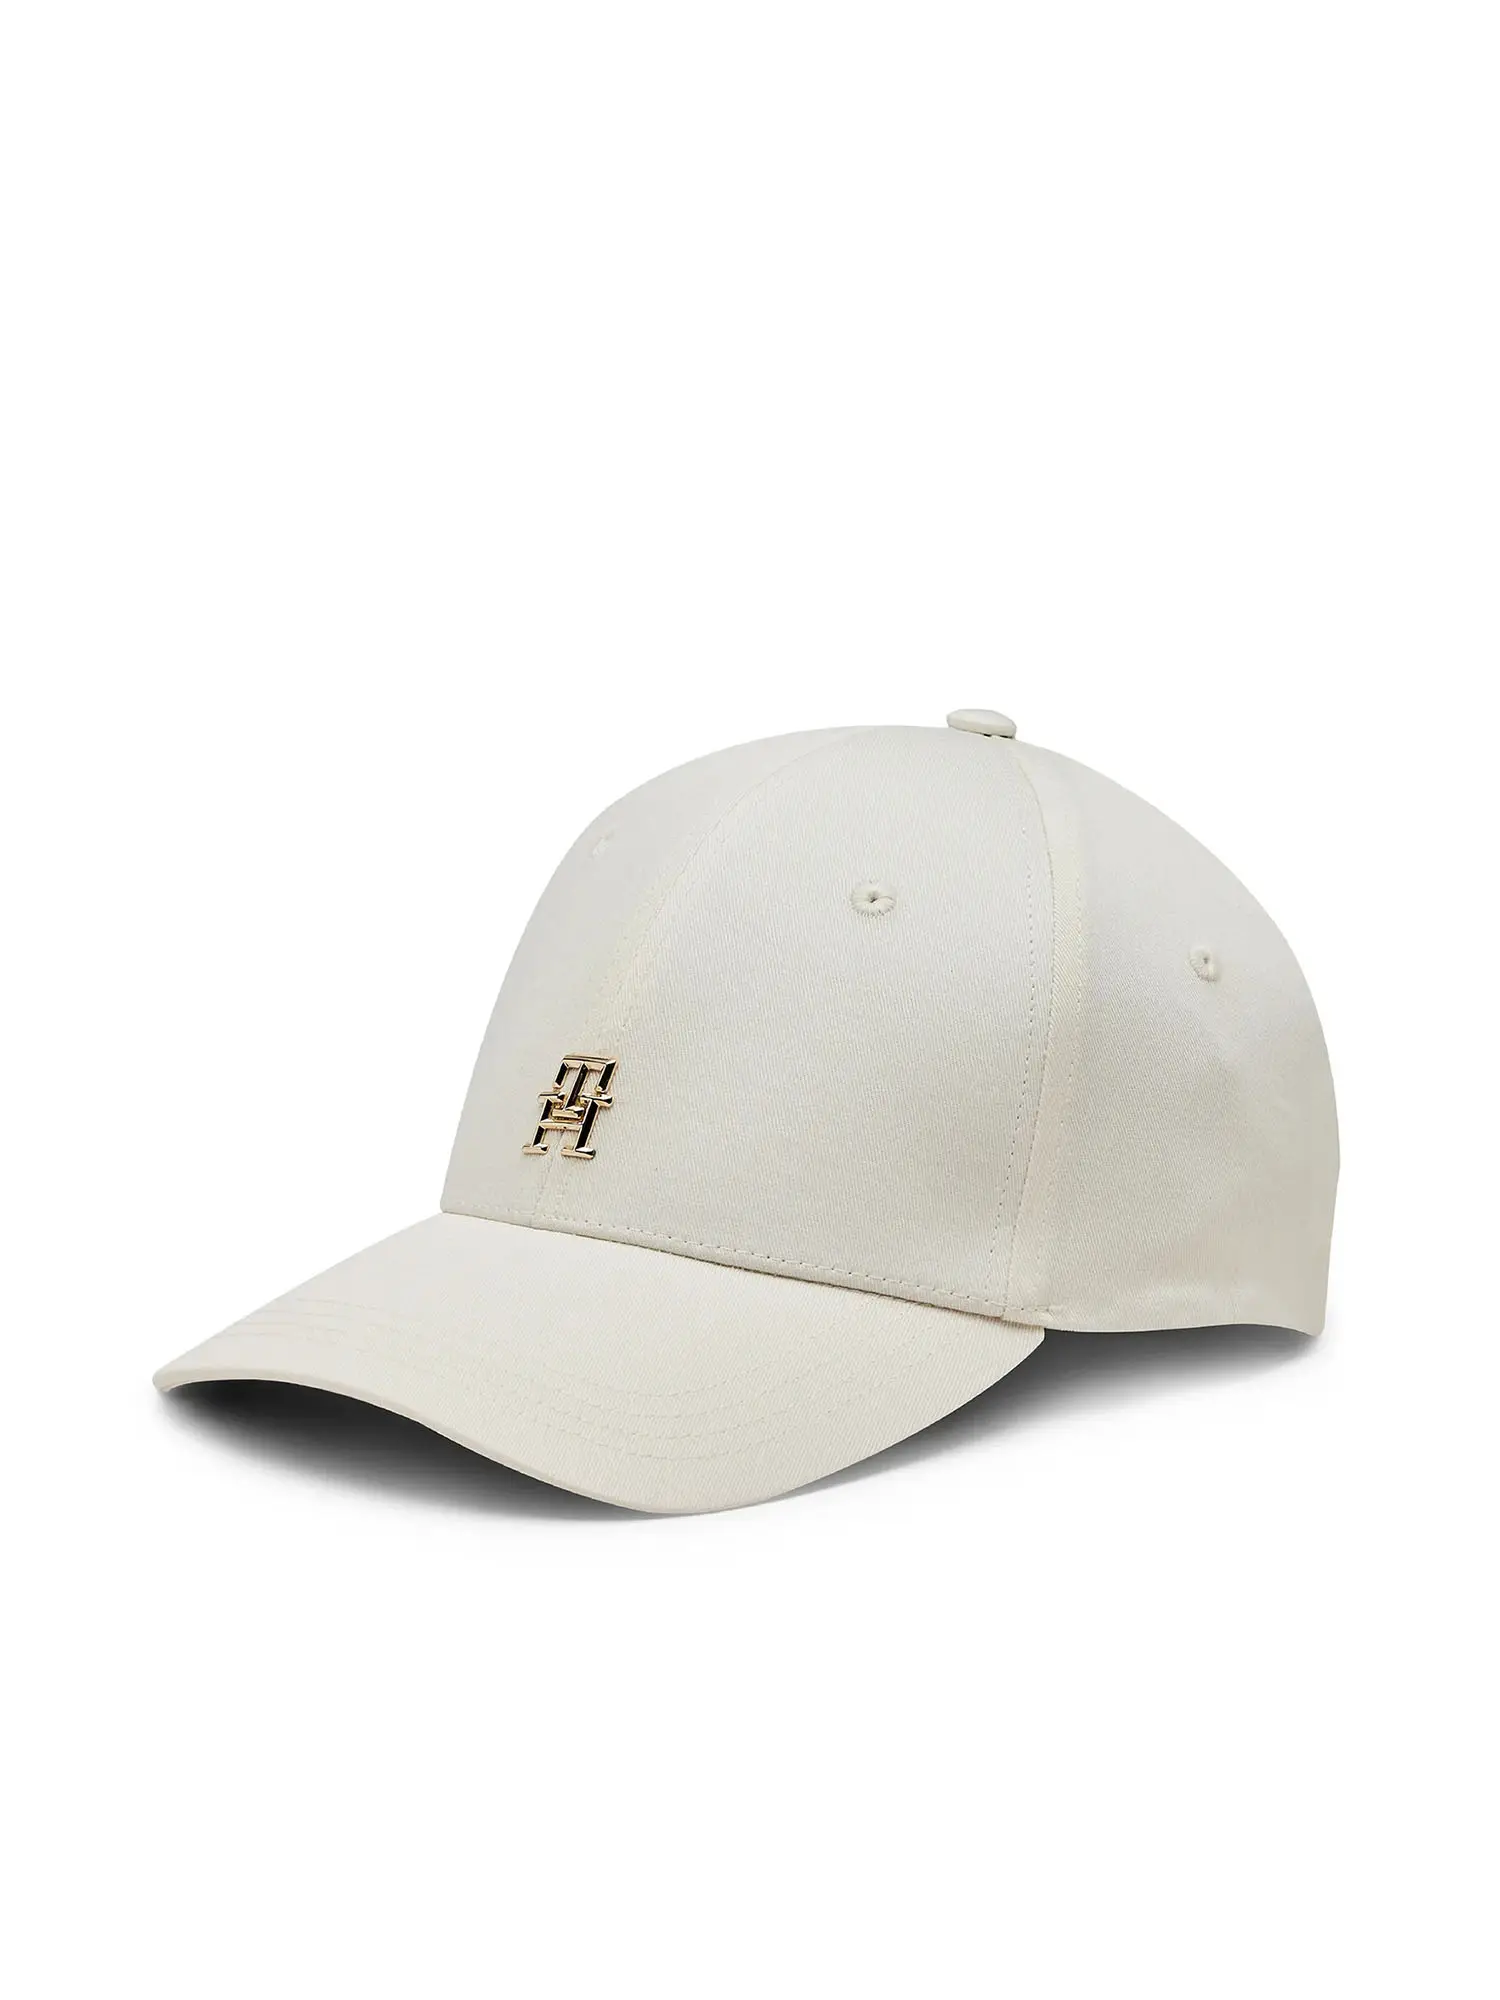 CAPPELLO DONNA - TOMMY HILFIGER - AW0AW15772 - BIANCO, UNICA